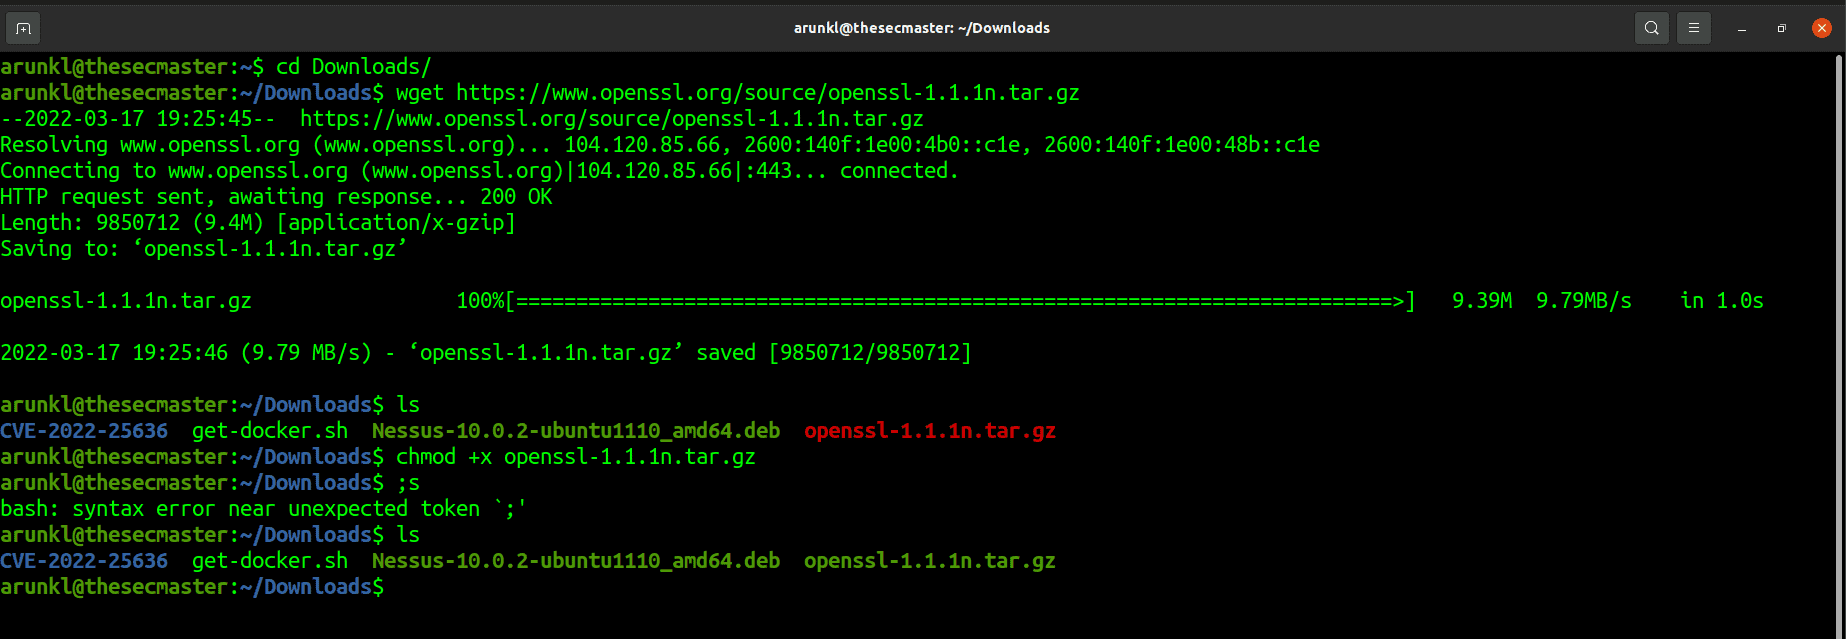 Download The Openssl Package